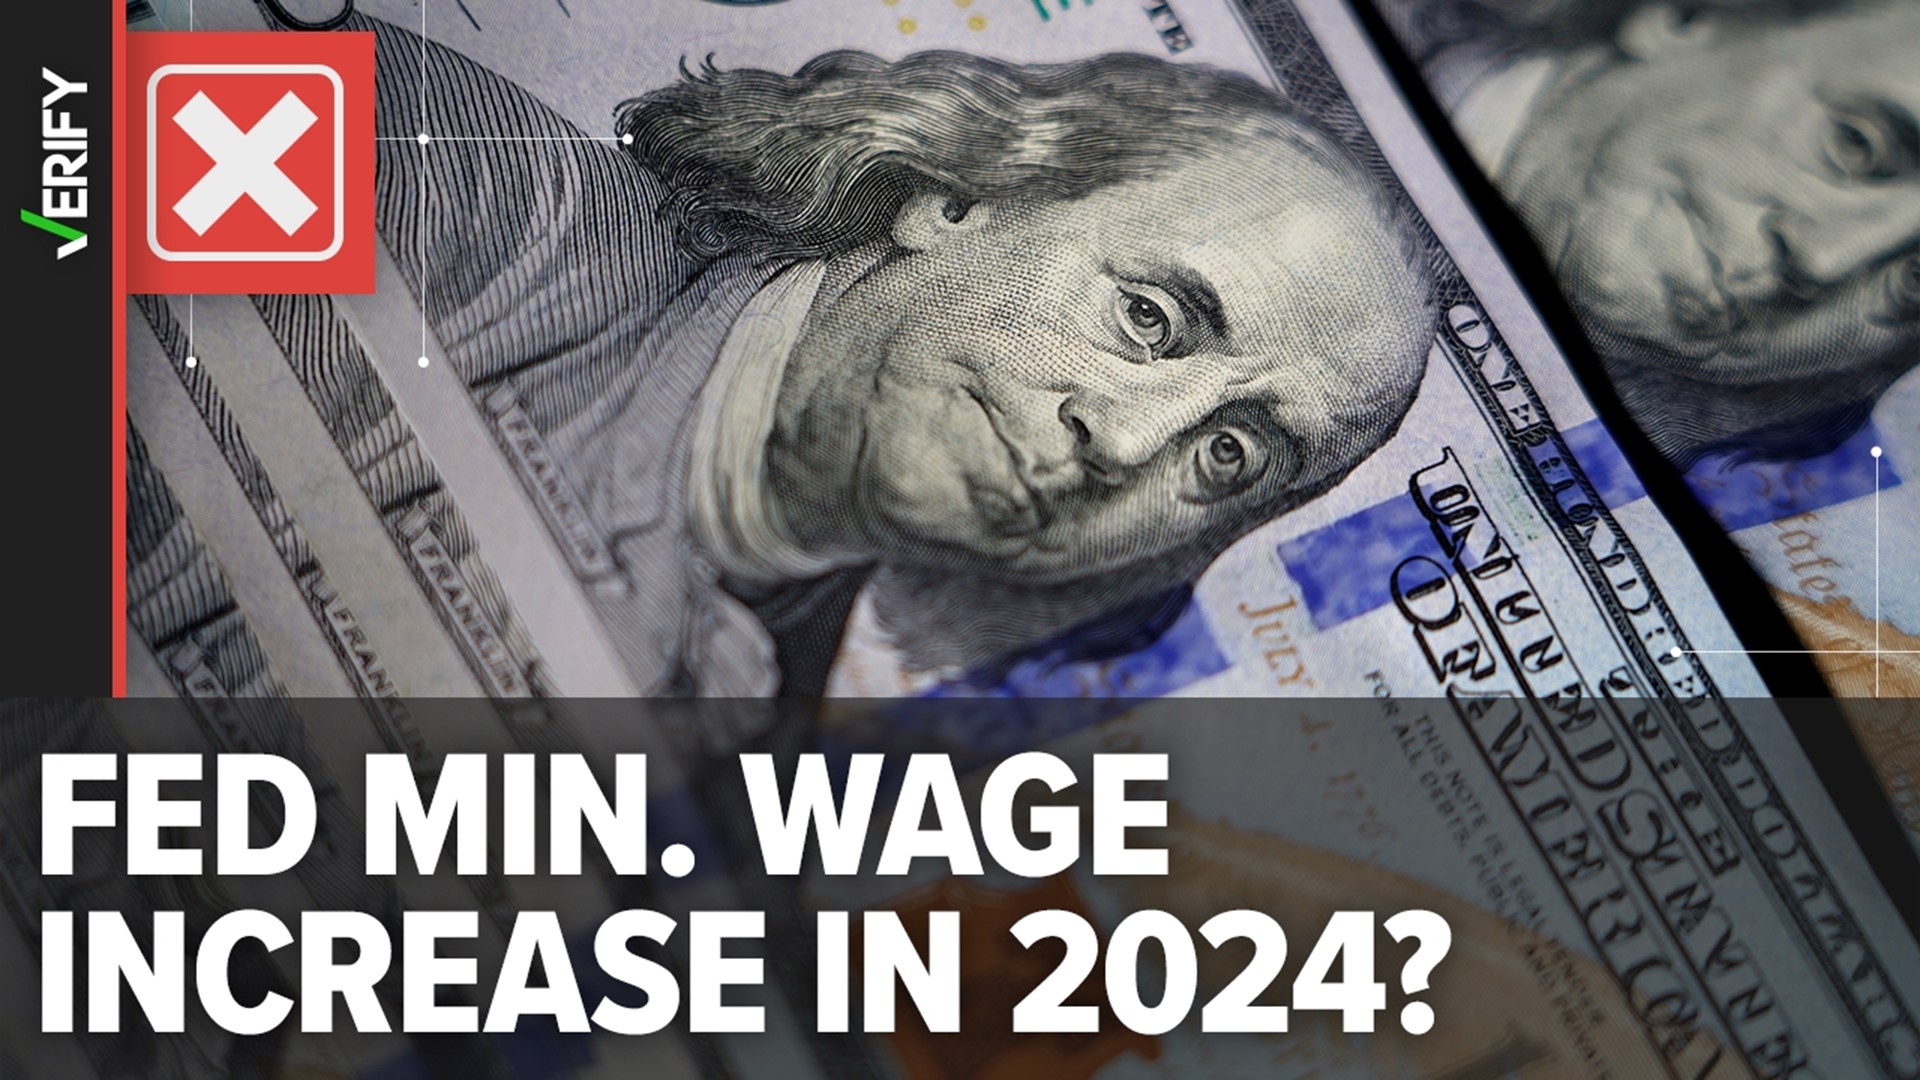 The federal minimum wage of $7.25 isn’t increasing in 2024. But Arizona, California, New York and other U.S. states are increasing their minimum wages as of Jan. 1.